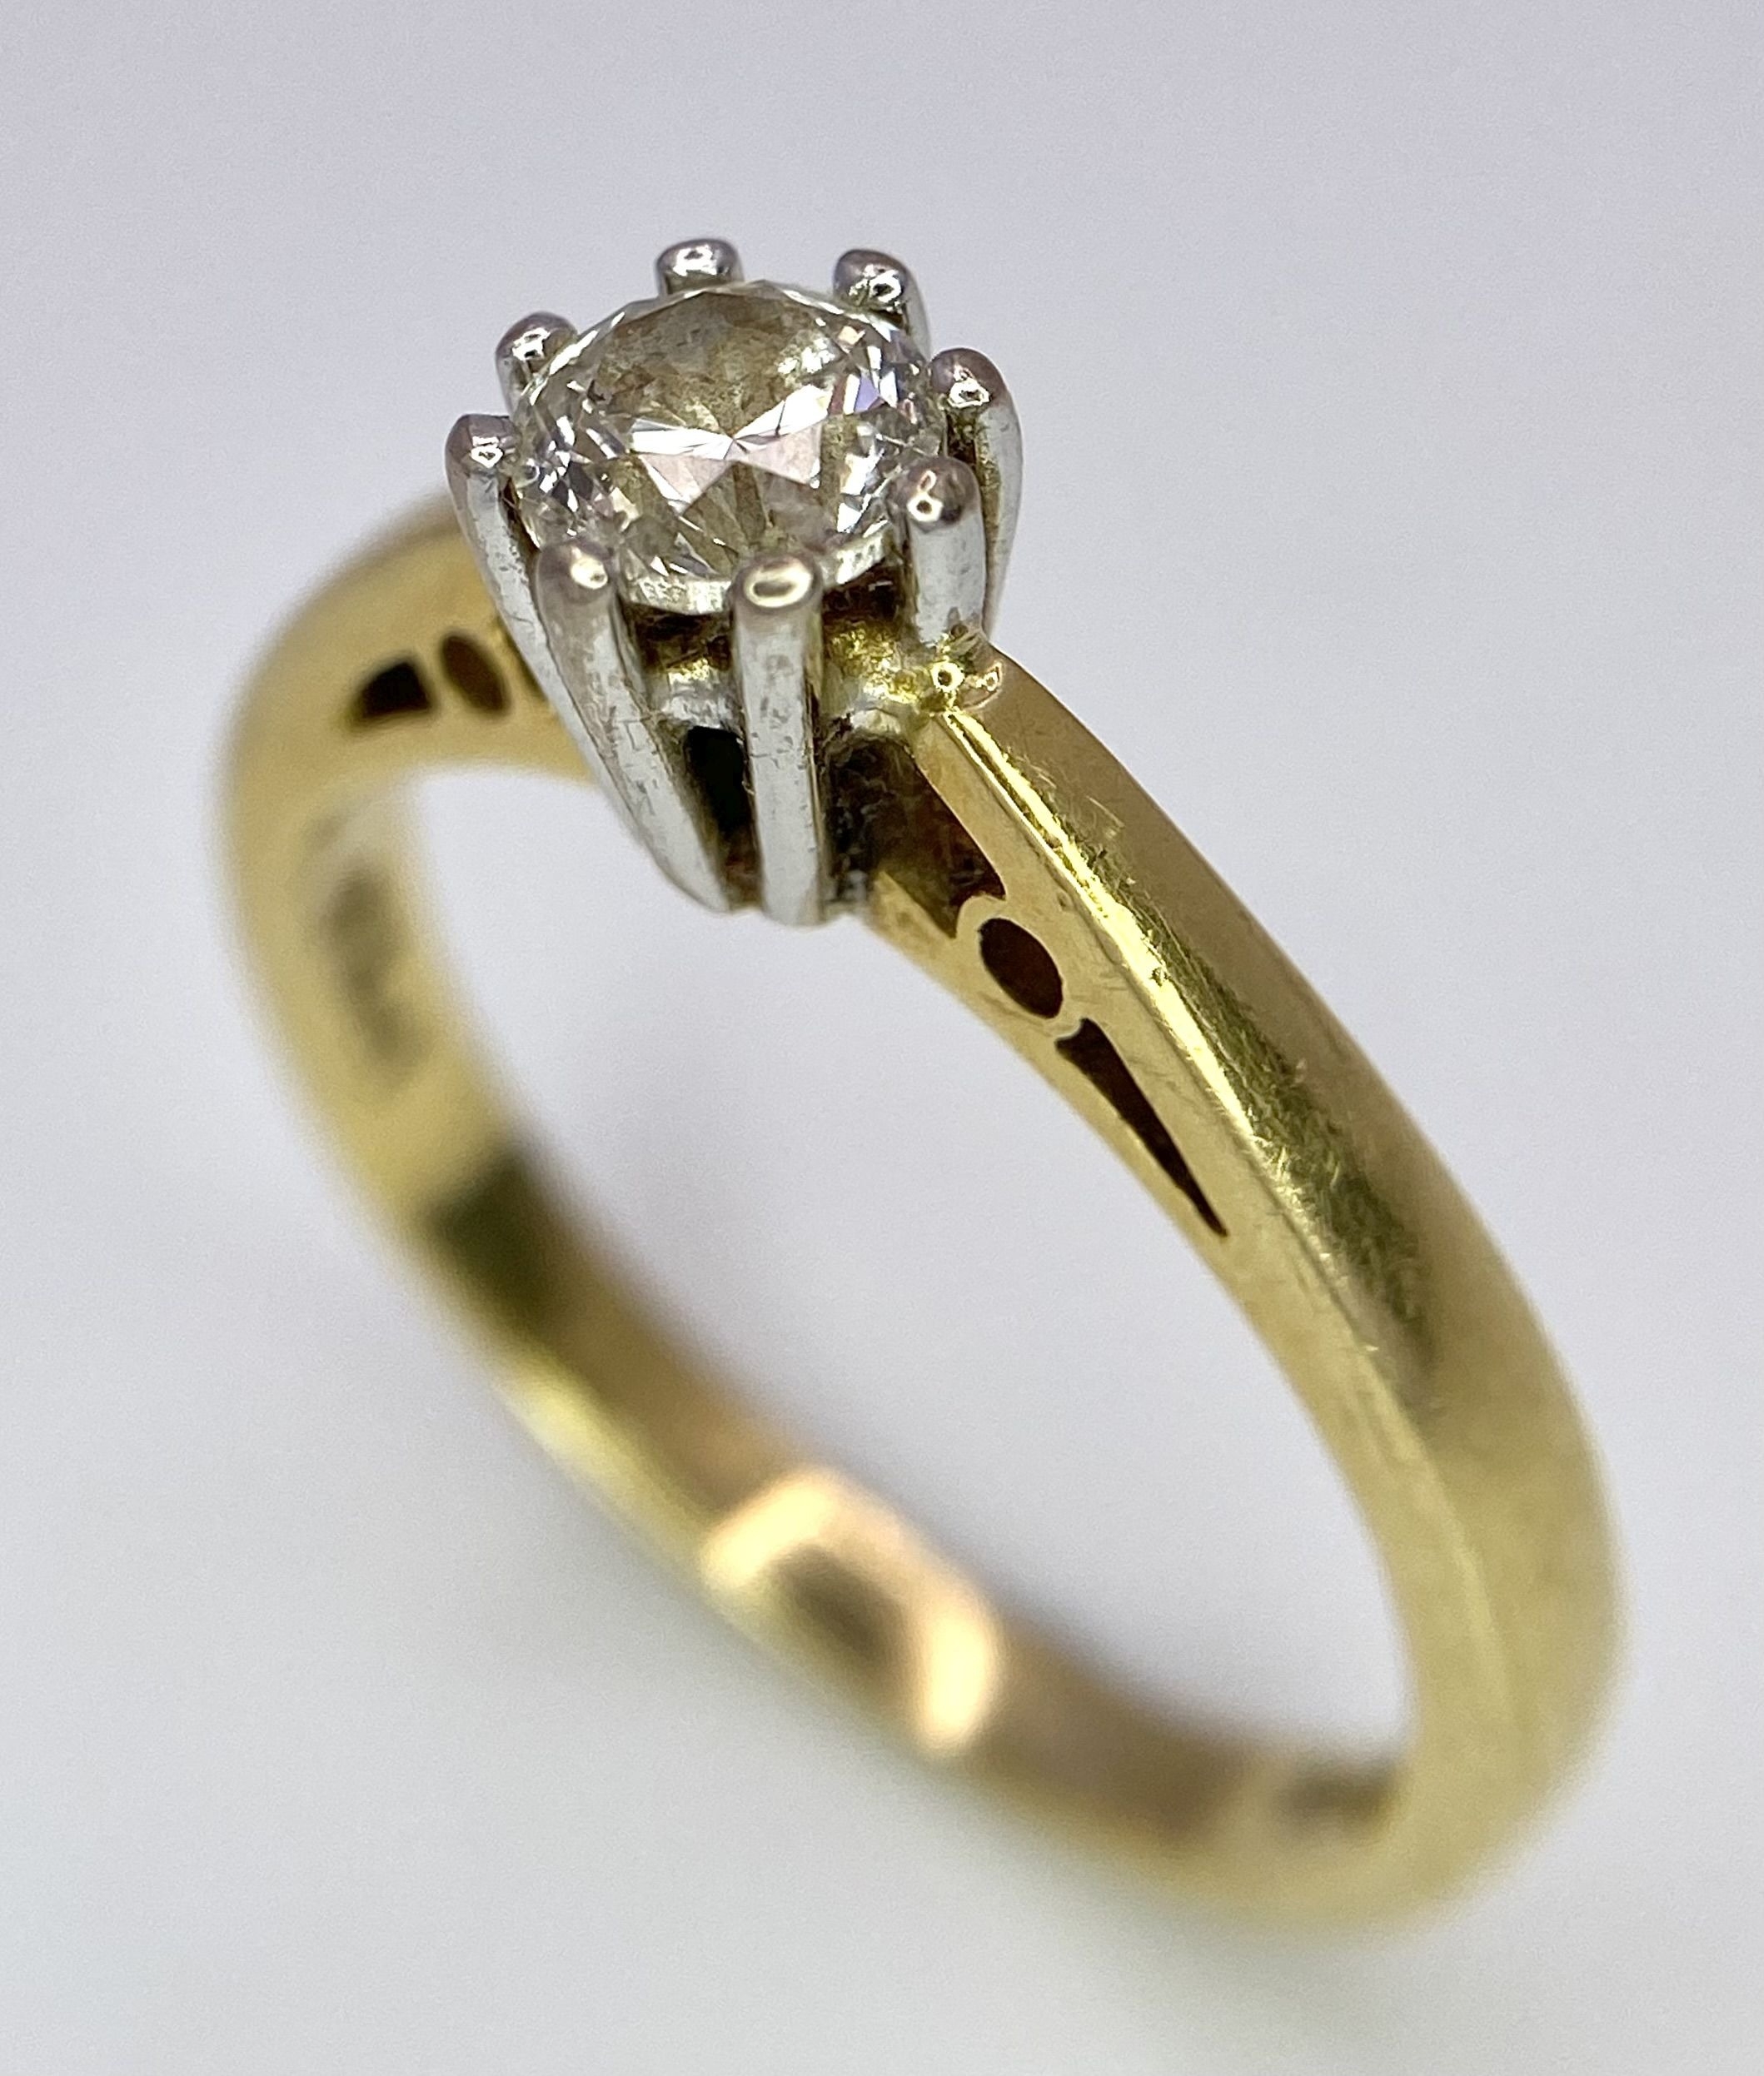 A Vintage 18K Yellow Gold Diamond Solitaire Ring. 0.40ct brilliant round cut diamond. Size L. 3.4g - Image 3 of 7